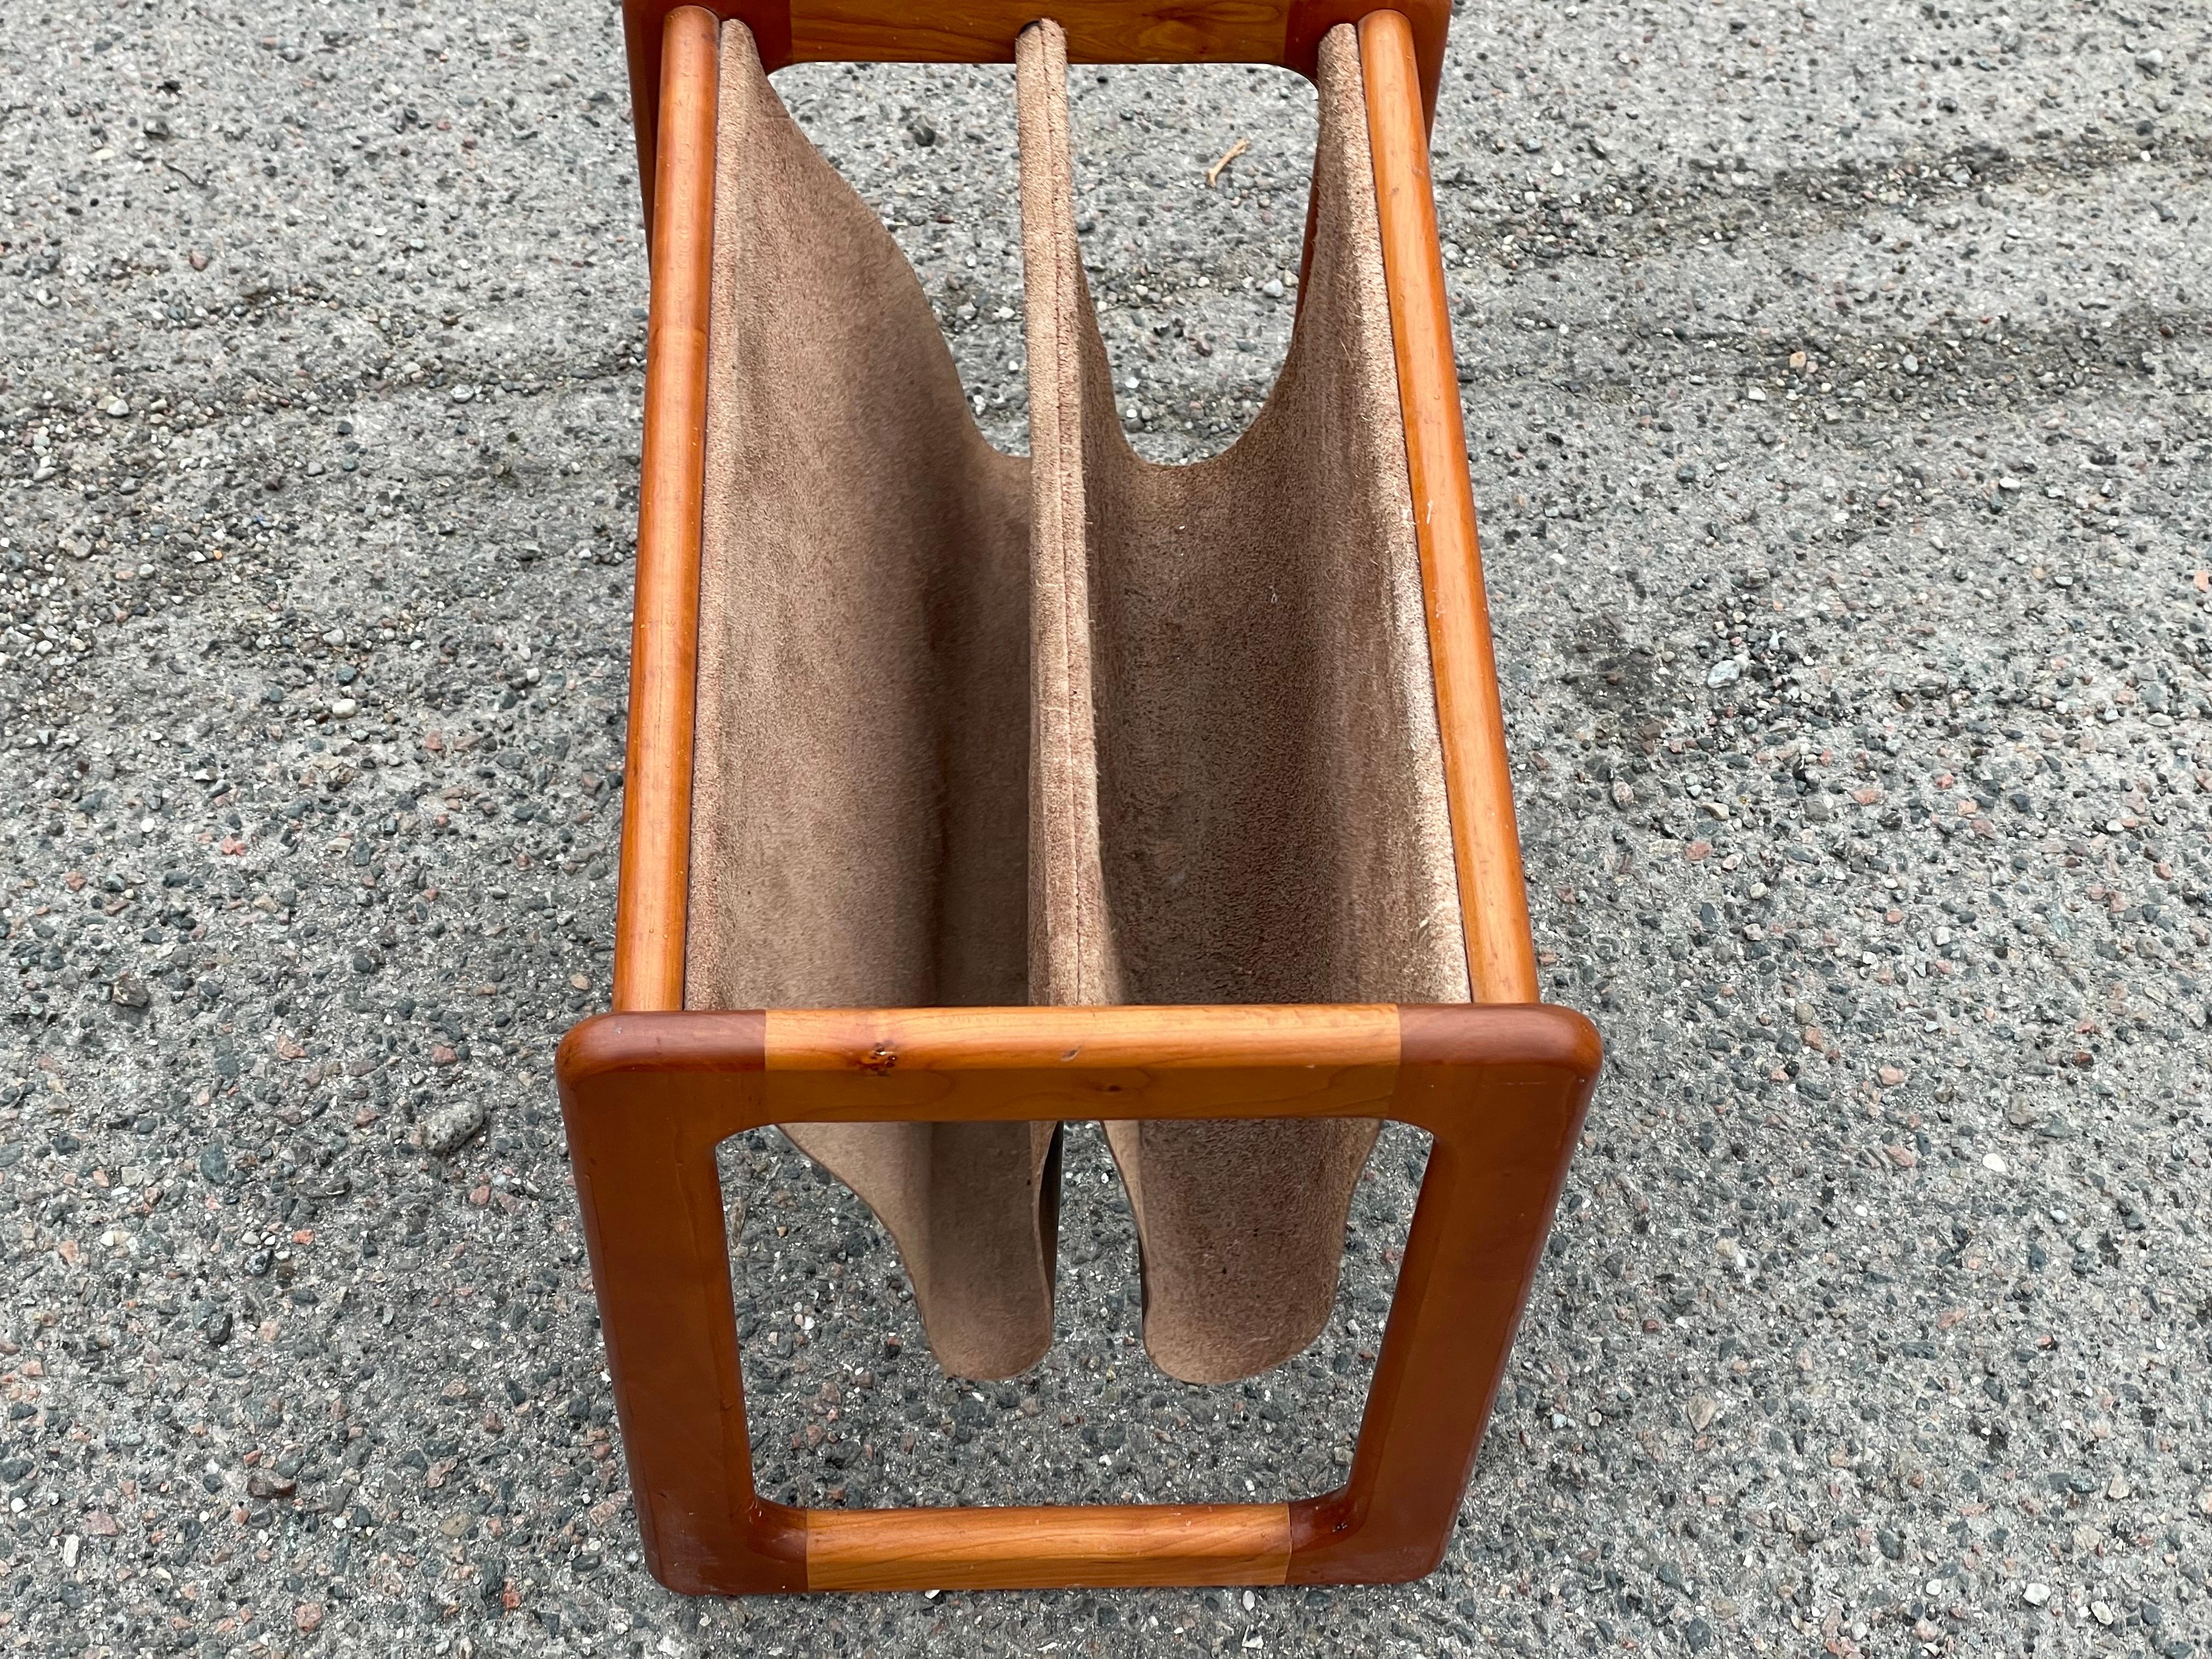 
Introducing the essence of Danish Mid-Century Modern design: a magazine holder crafted in teak and brown leather. Elevate your space with timeless elegance and functionality.